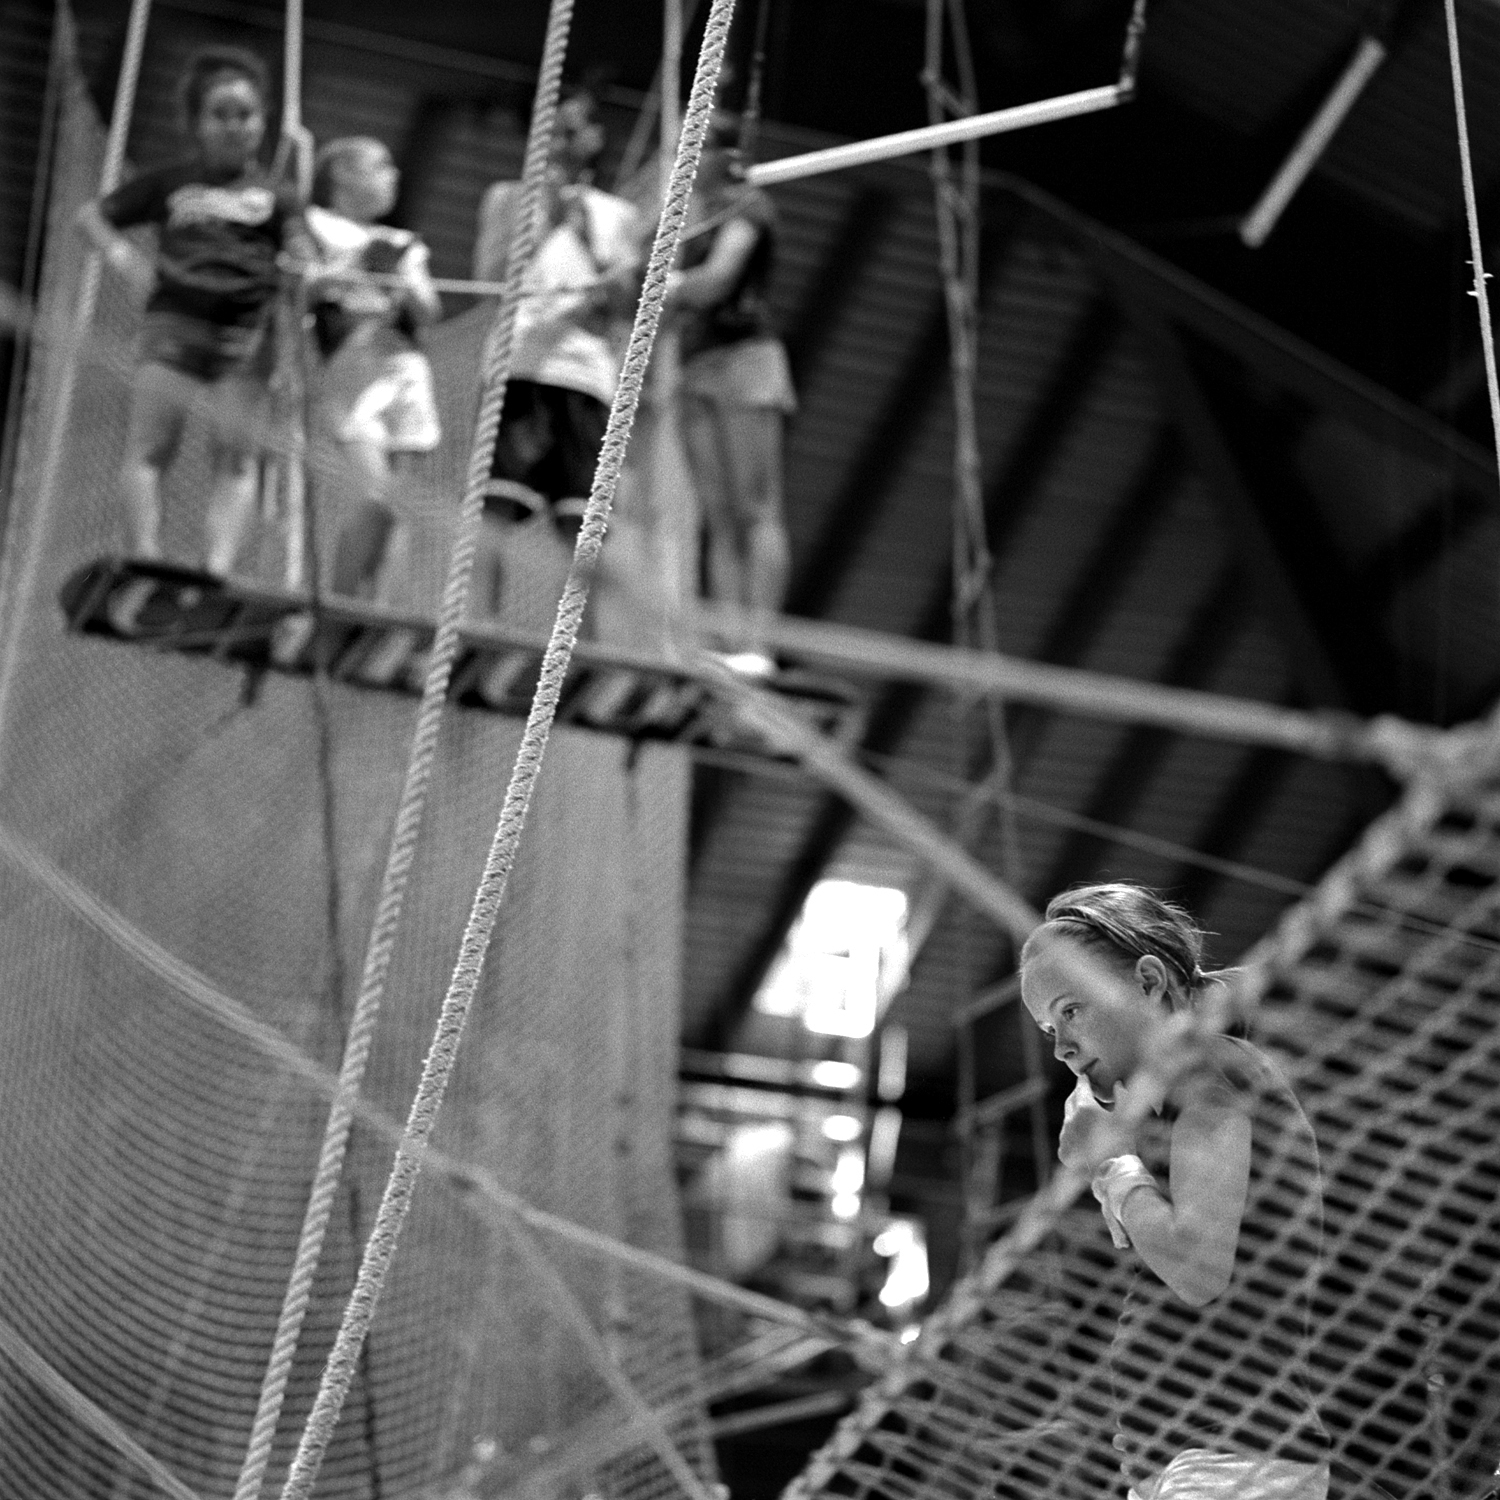 Josie Murphy, 13, ponders advice from her trainer on the flying trapeze while others await their turn to practice. For the most challenging acts, performers are selected earl, based on their potential and suitability.